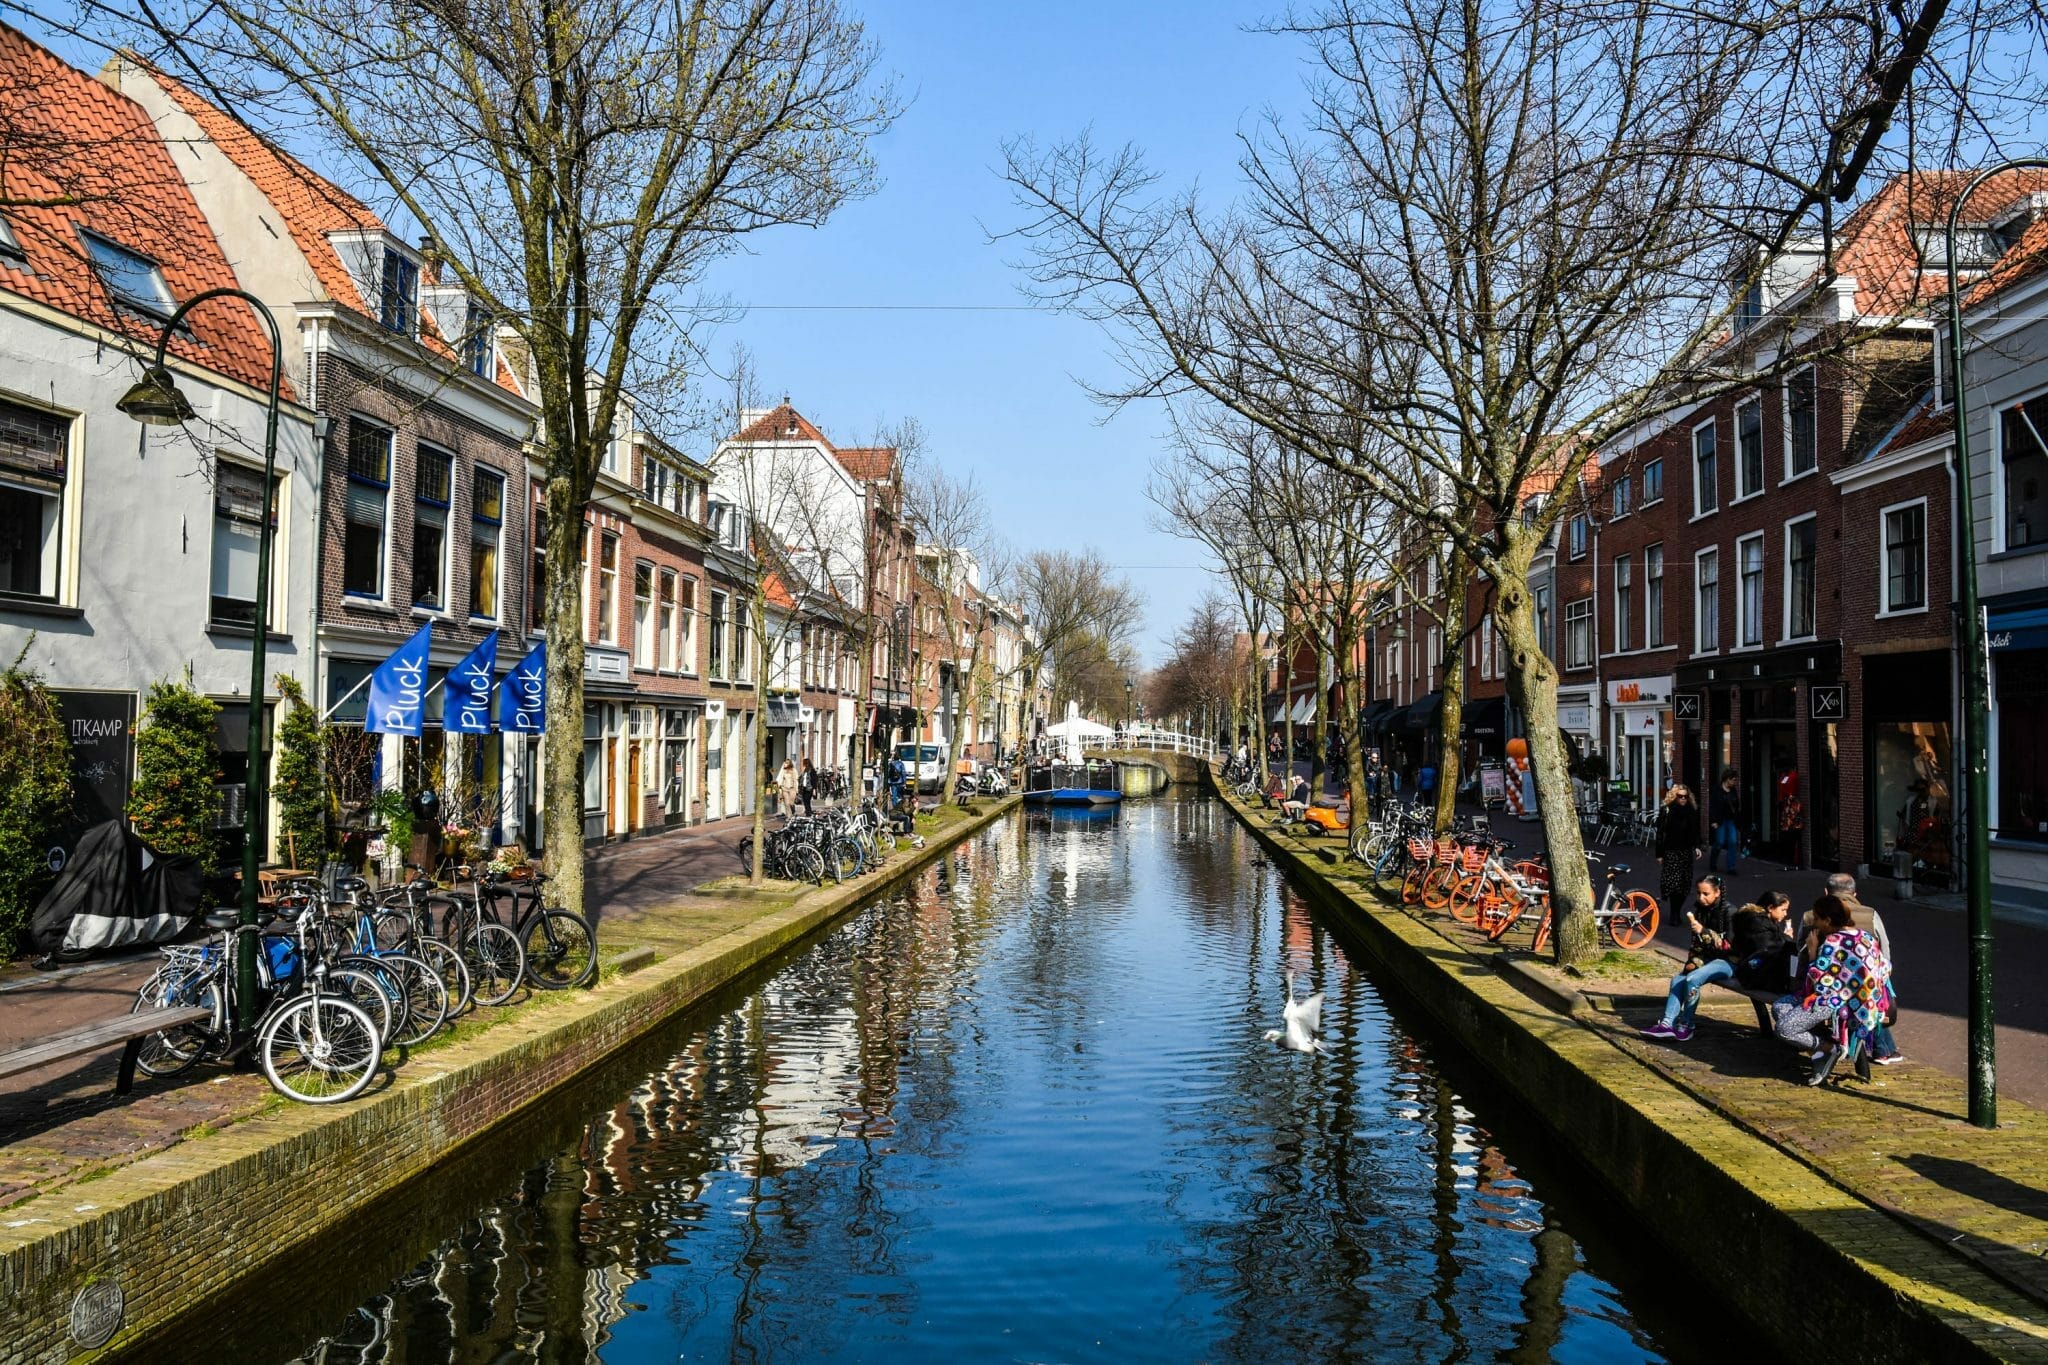 Delft Netherlands: The South Holland Delight